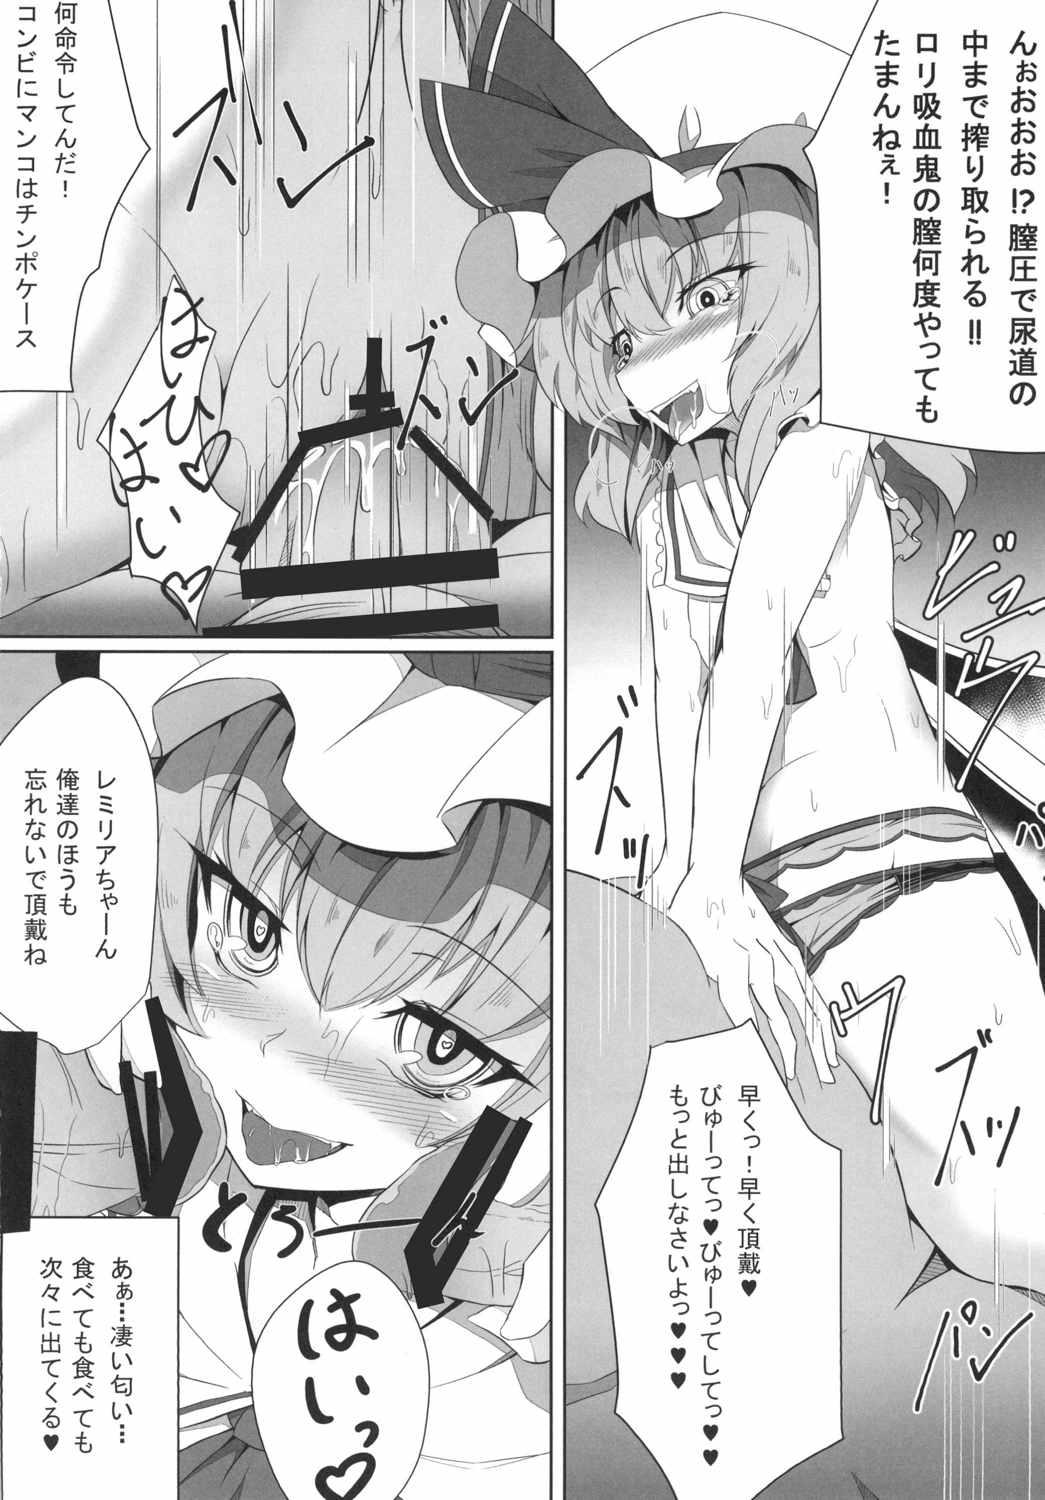 Letsdoeit M.P. Vol. 4 - Touhou project Spying - Page 7